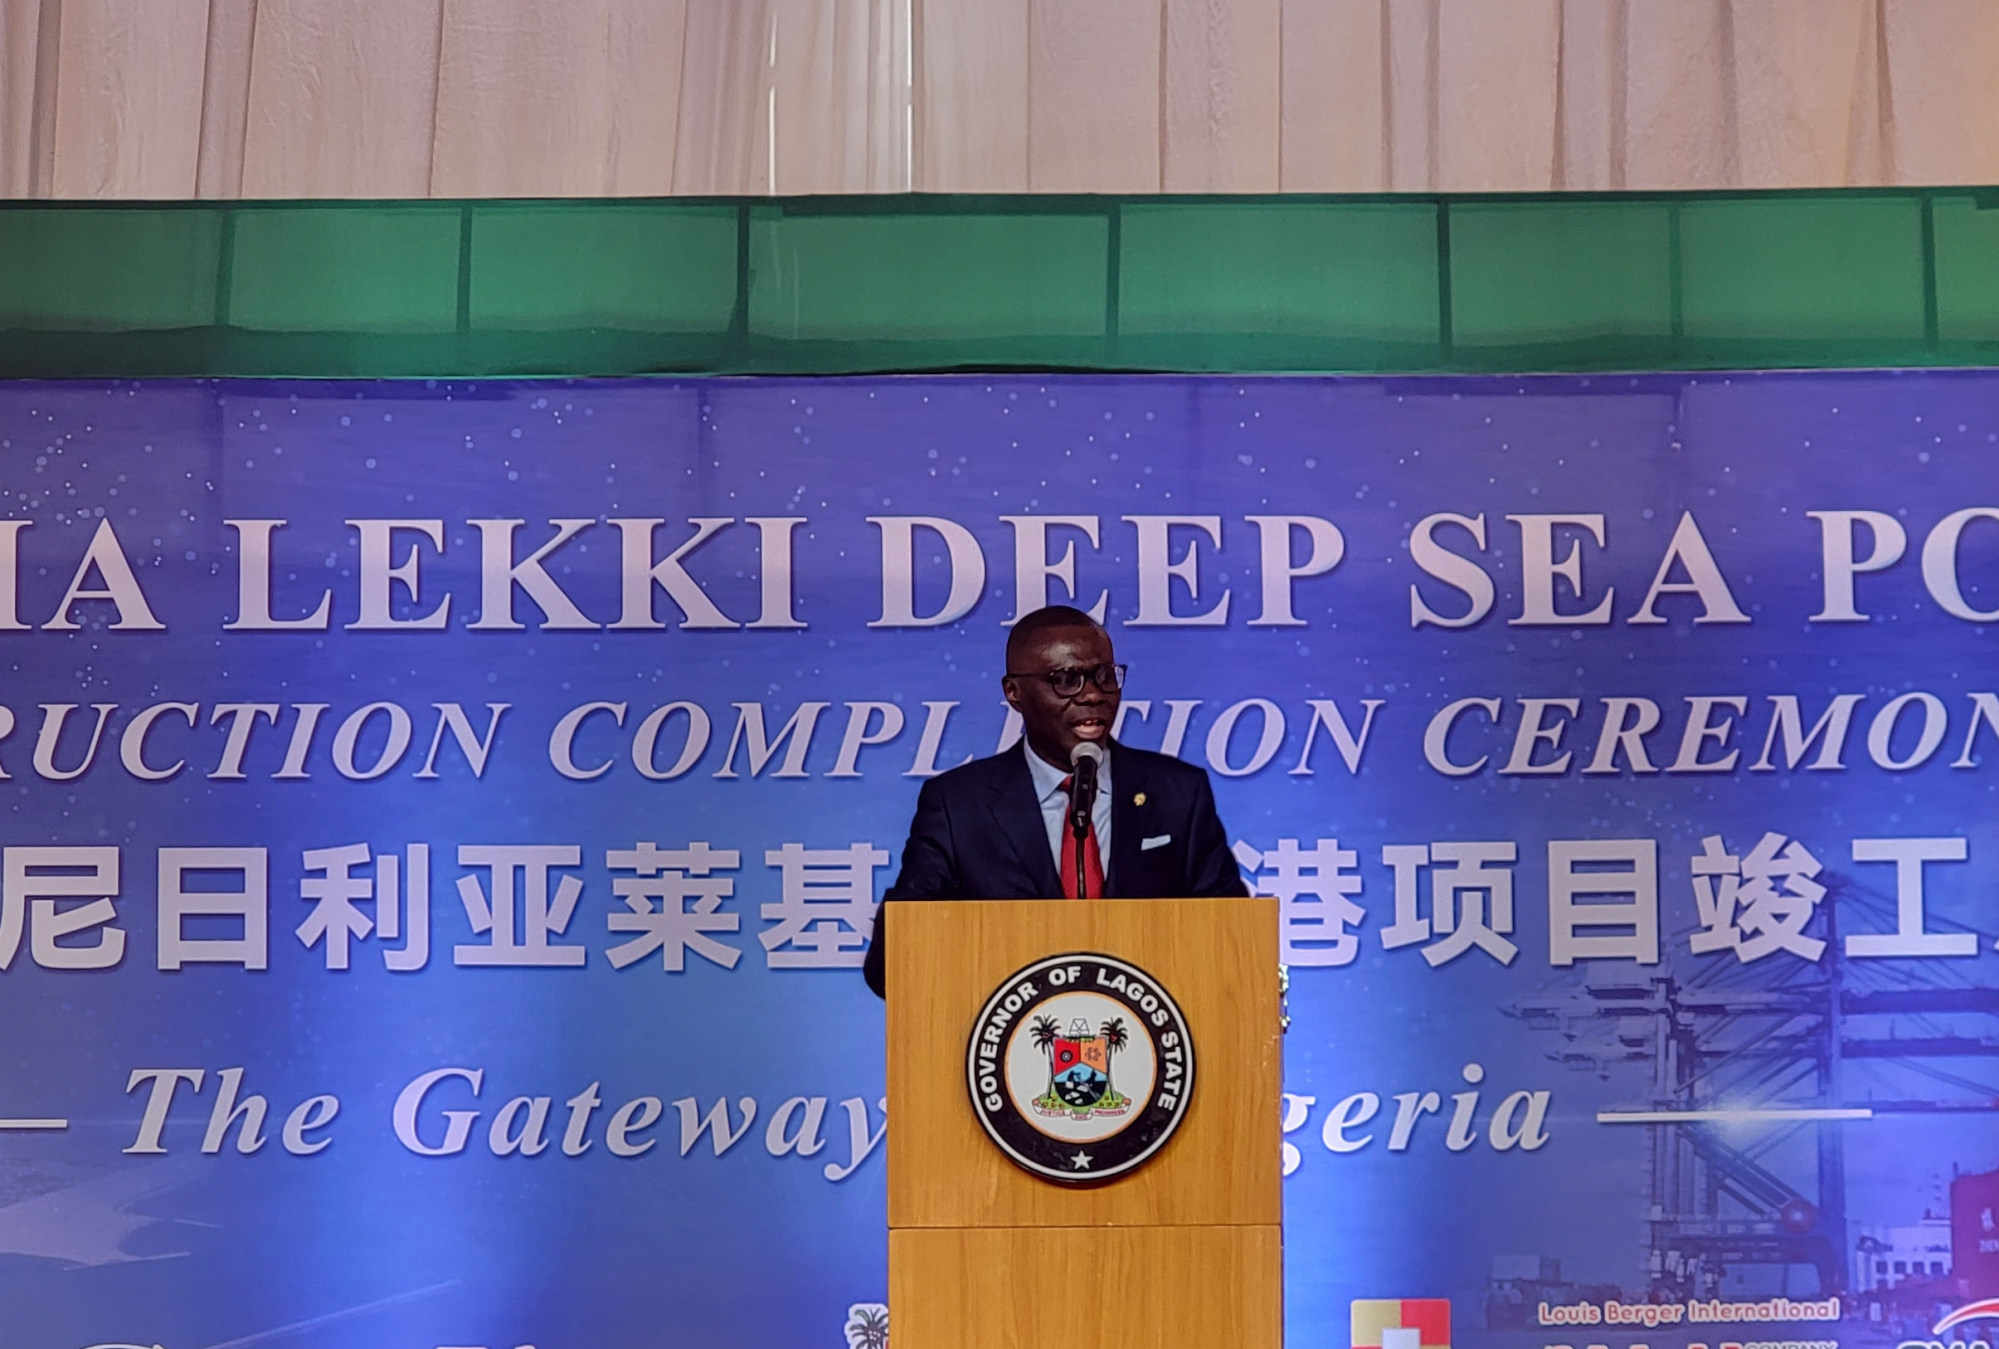 Babajide Sanwo-Olu, the governor of Nigeria’s Lagos state, speaks at an event on Monday marking the completion of the Lekki Deep Sea Port. Photo: Xinhua